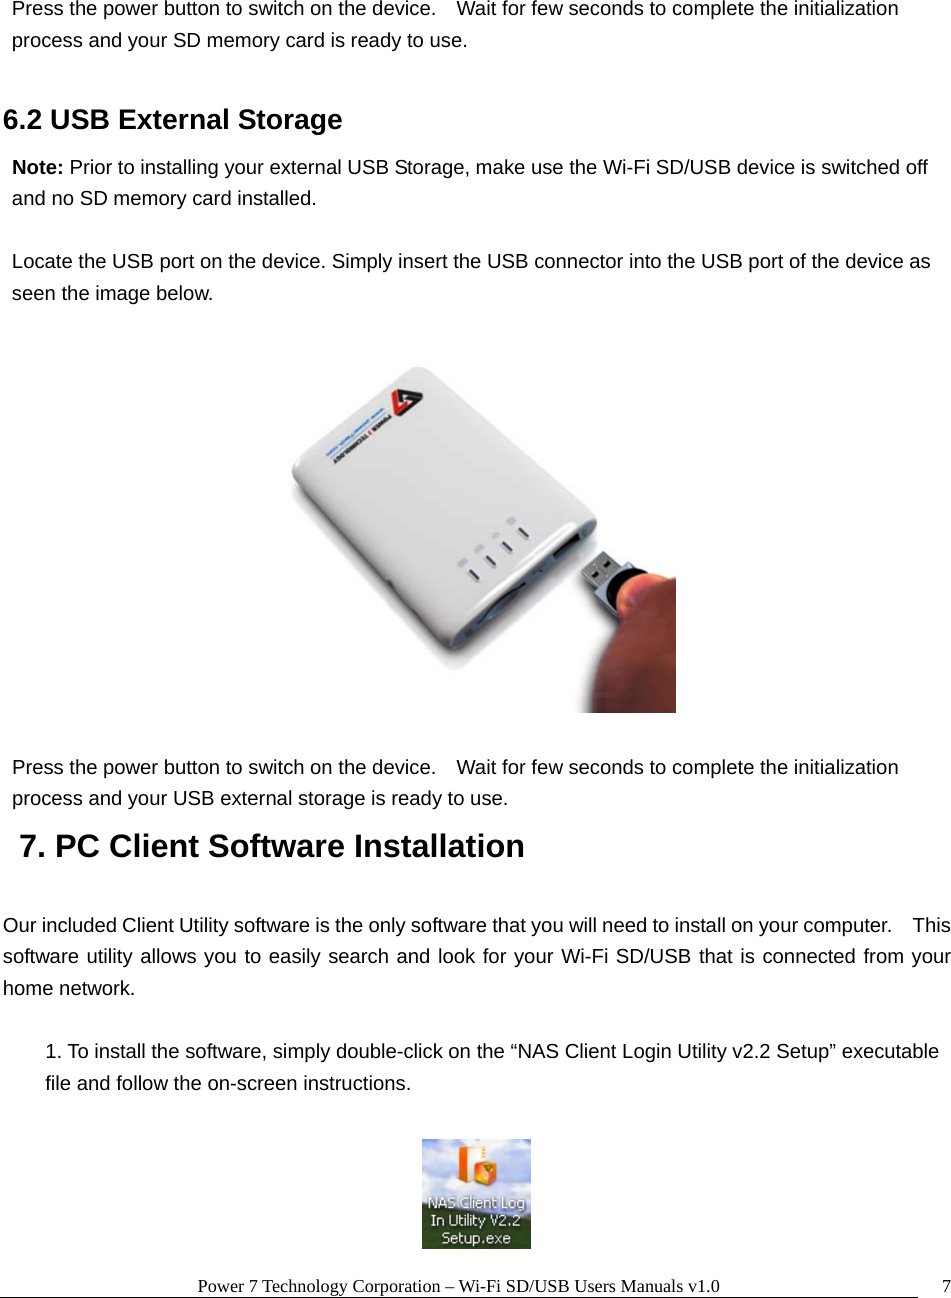 Power 7 Technology Corporation – Wi-Fi SD/USB Users Manuals v1.0  7 Press the power button to switch on the device.    Wait for few seconds to complete the initialization process and your SD memory card is ready to use.  6.2 USB External Storage Note: Prior to installing your external USB Storage, make use the Wi-Fi SD/USB device is switched off and no SD memory card installed.  Locate the USB port on the device. Simply insert the USB connector into the USB port of the device as seen the image below.        Press the power button to switch on the device.    Wait for few seconds to complete the initialization process and your USB external storage is ready to use.   7. PC Client Software Installation  Our included Client Utility software is the only software that you will need to install on your computer.    This software utility allows you to easily search and look for your Wi-Fi SD/USB that is connected from your home network.  1. To install the software, simply double-click on the “NAS Client Login Utility v2.2 Setup” executable file and follow the on-screen instructions.     